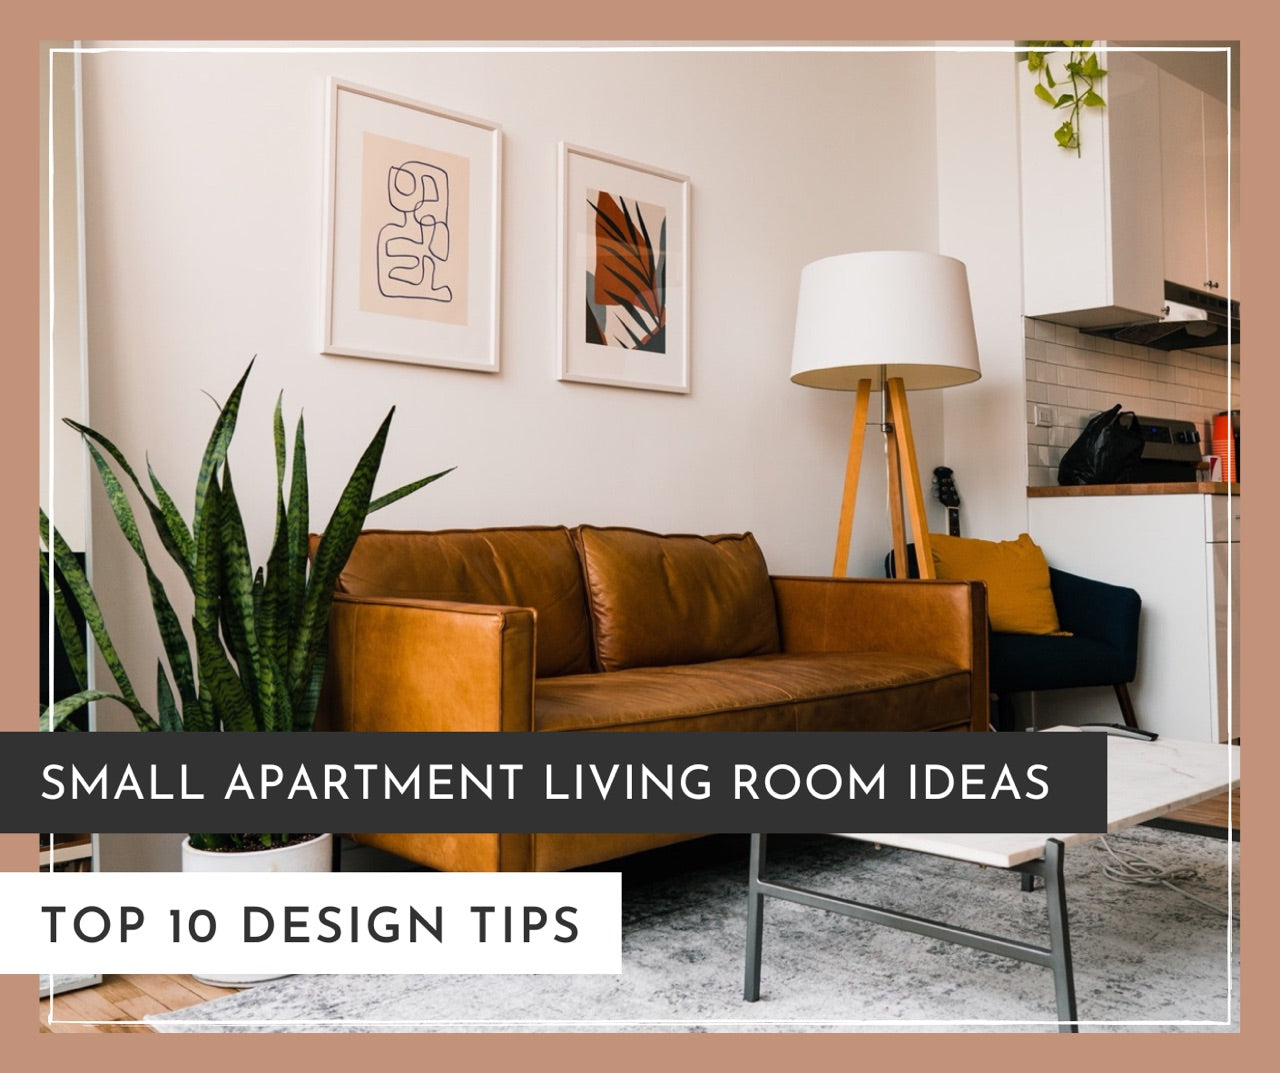 10 Tips for Decorating Small Spaces